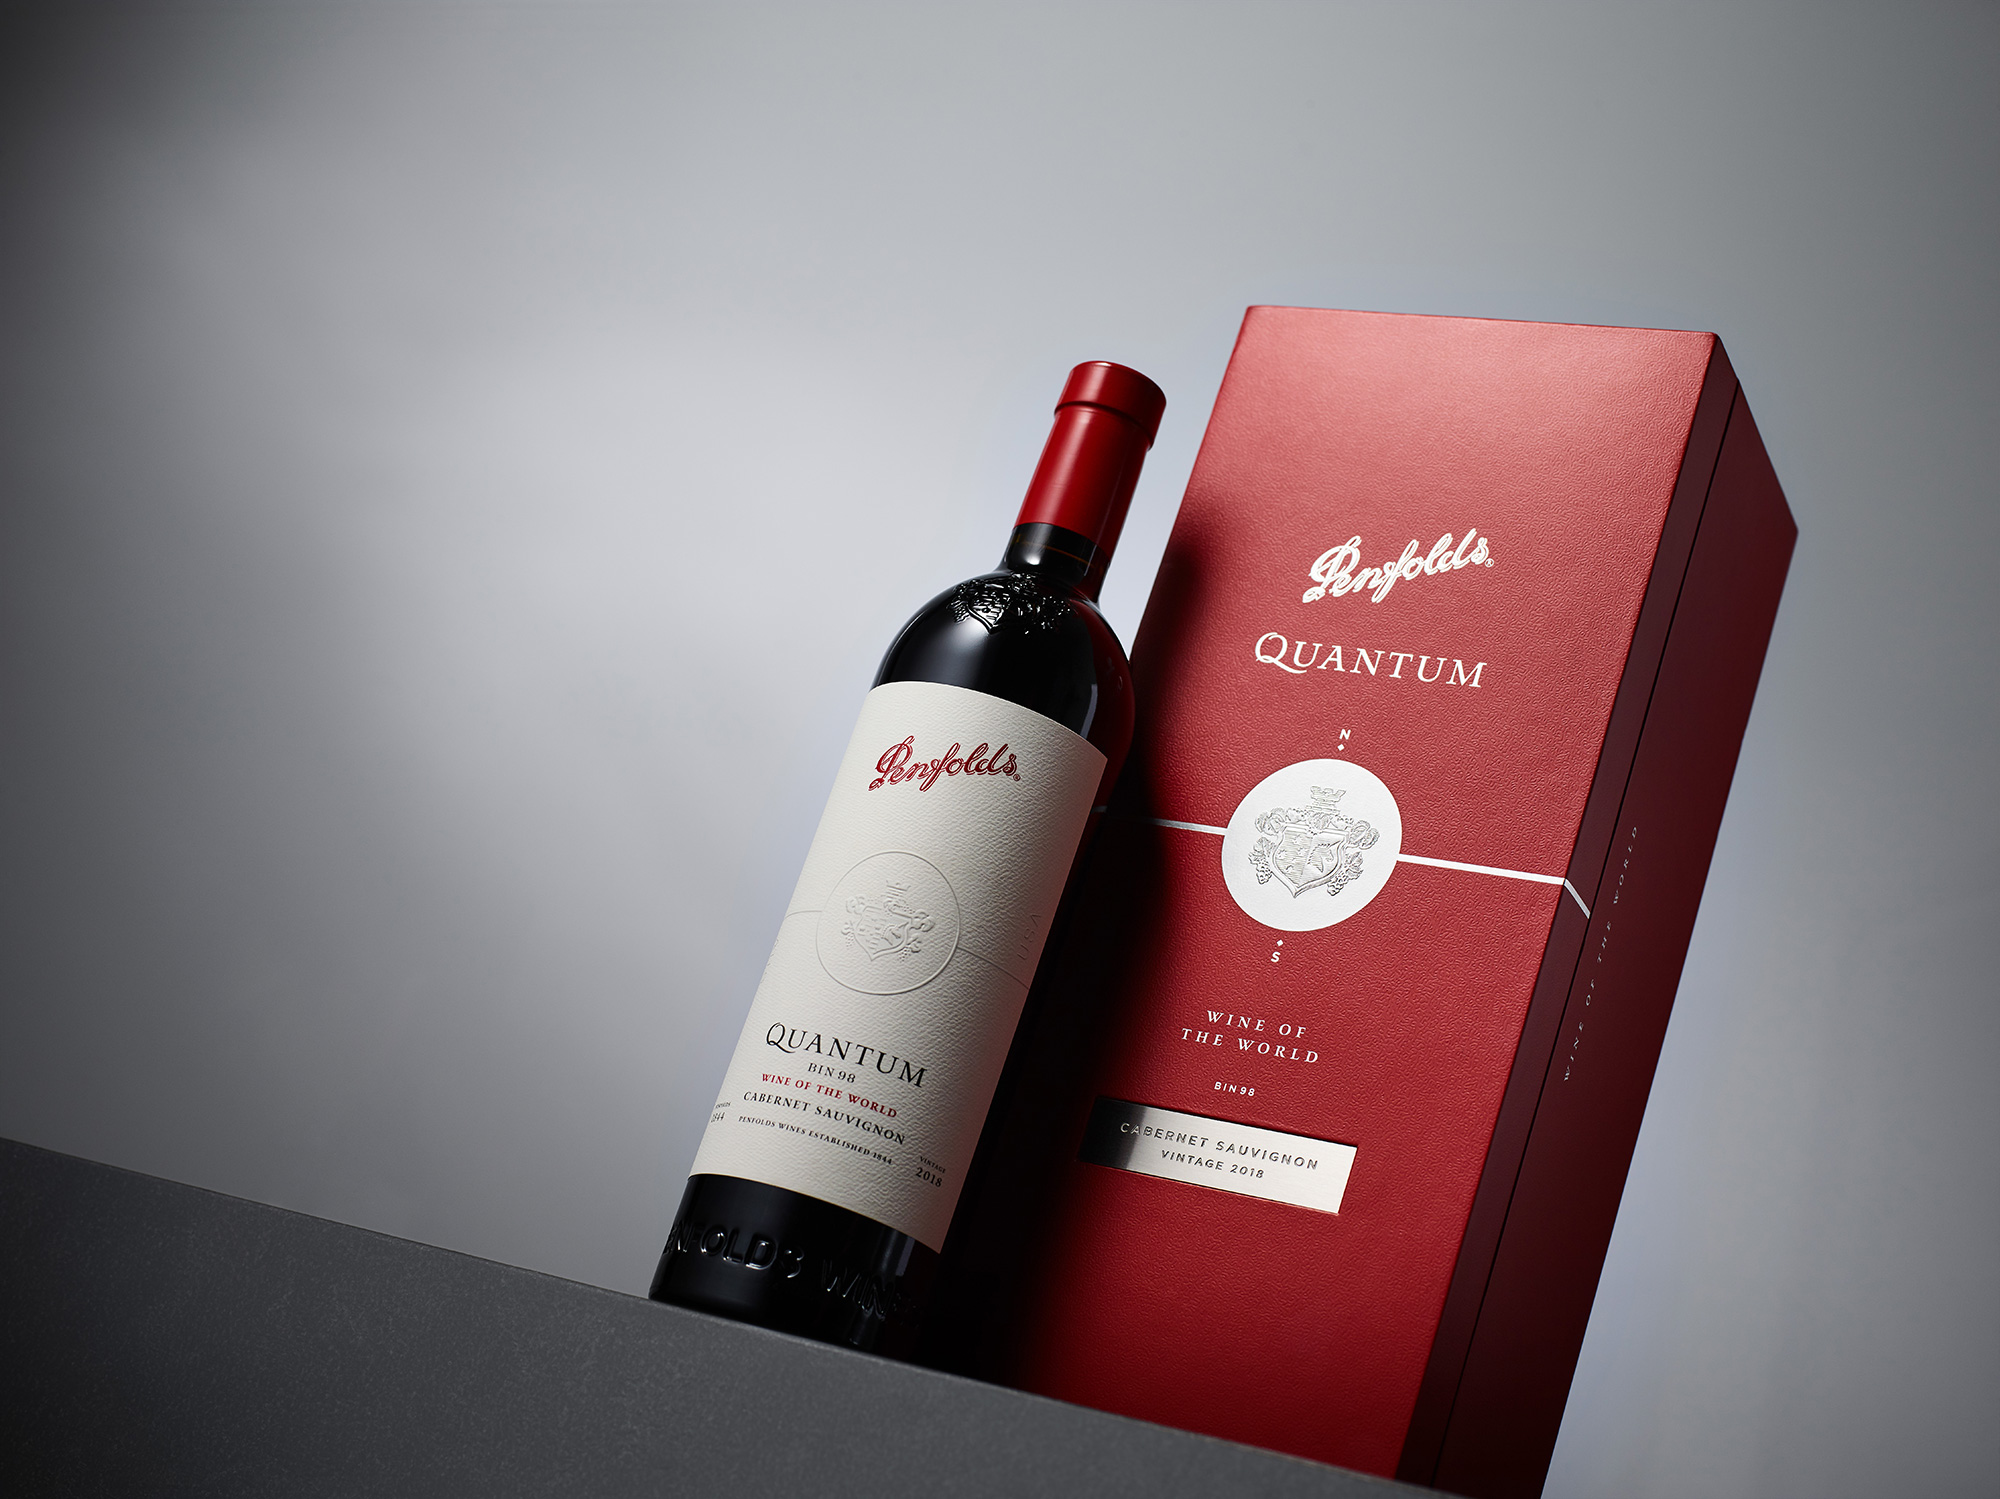 Quantum Bin 98 is the flagship wine in the Penfolds California Collection